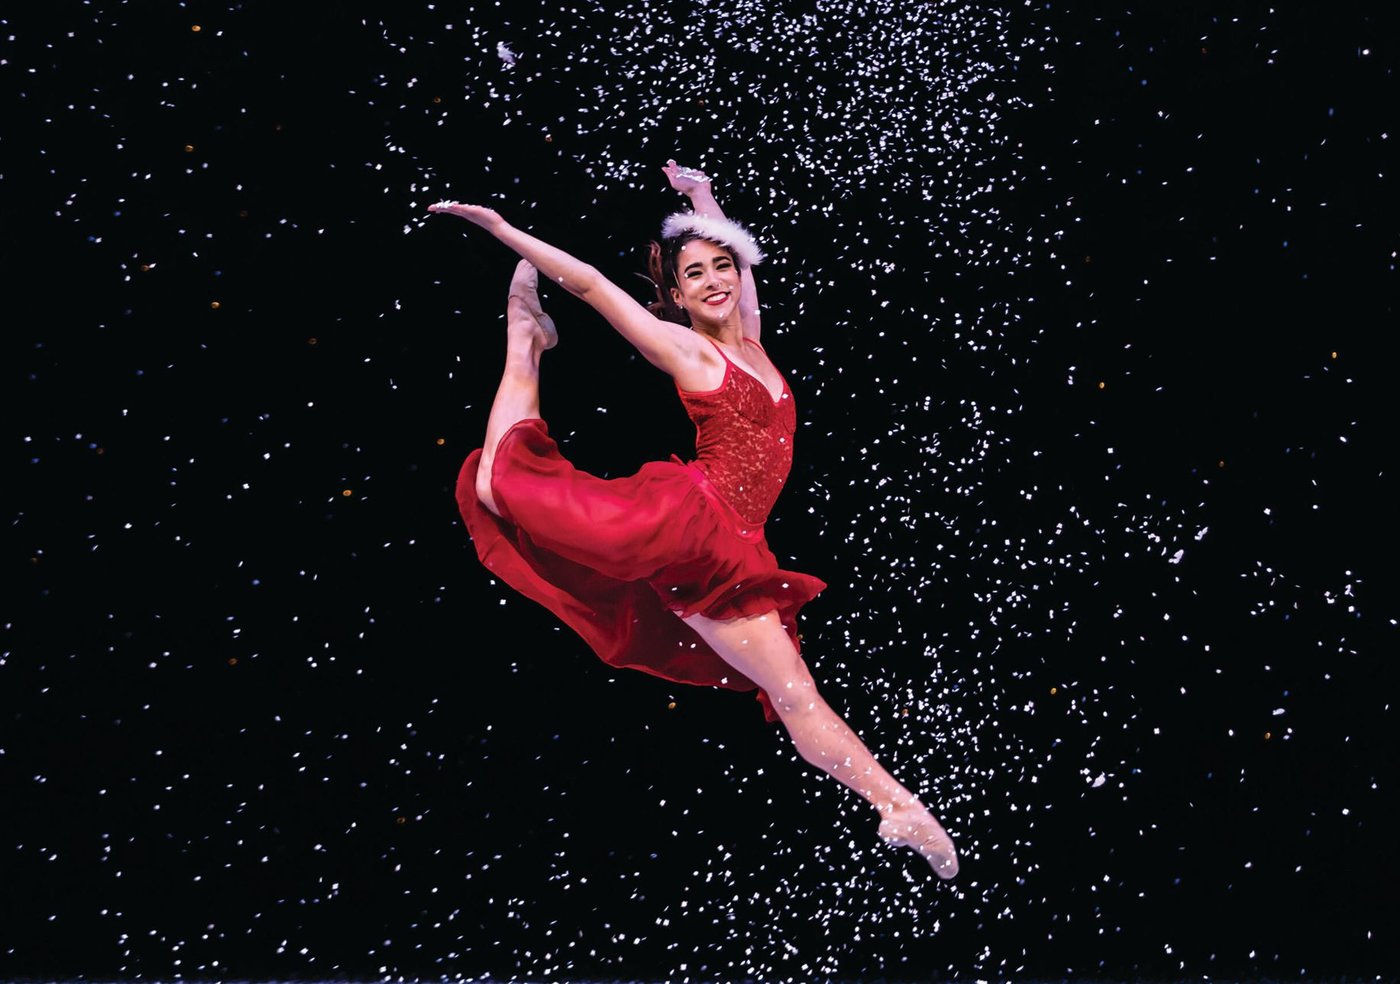 Tess Lane in The Christmas Ballet, which is touring the Bay Area Nov. 19 to Dec. 26 PHOTO BY CHRIS HARDY/COURTESY OF SMUIN CONTEMPORARY BALLET